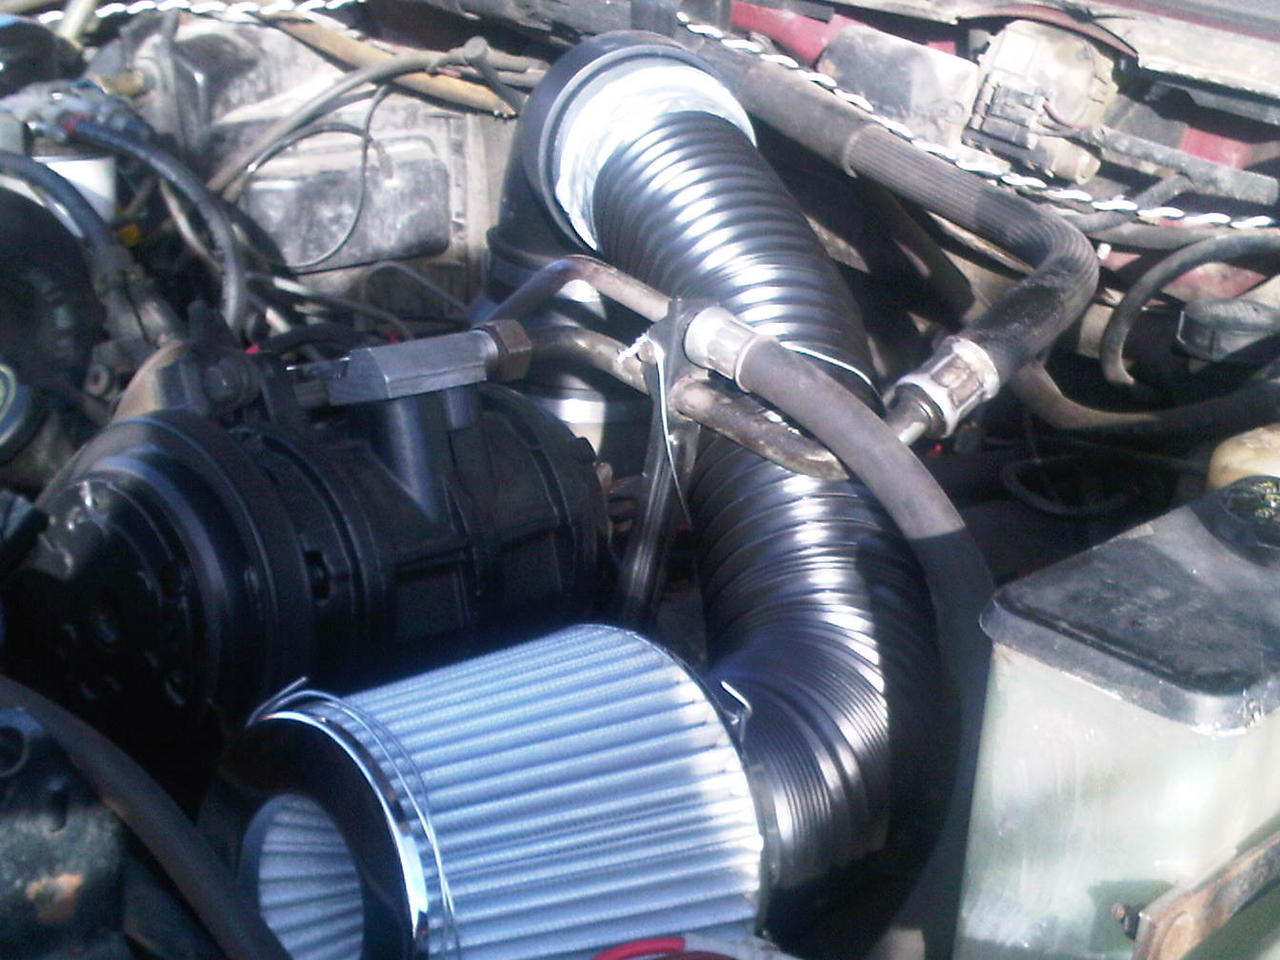 Fuel Filter Housing - Ford Truck Enthusiasts Forums 2011 Ford E350 Fuel Filter Location